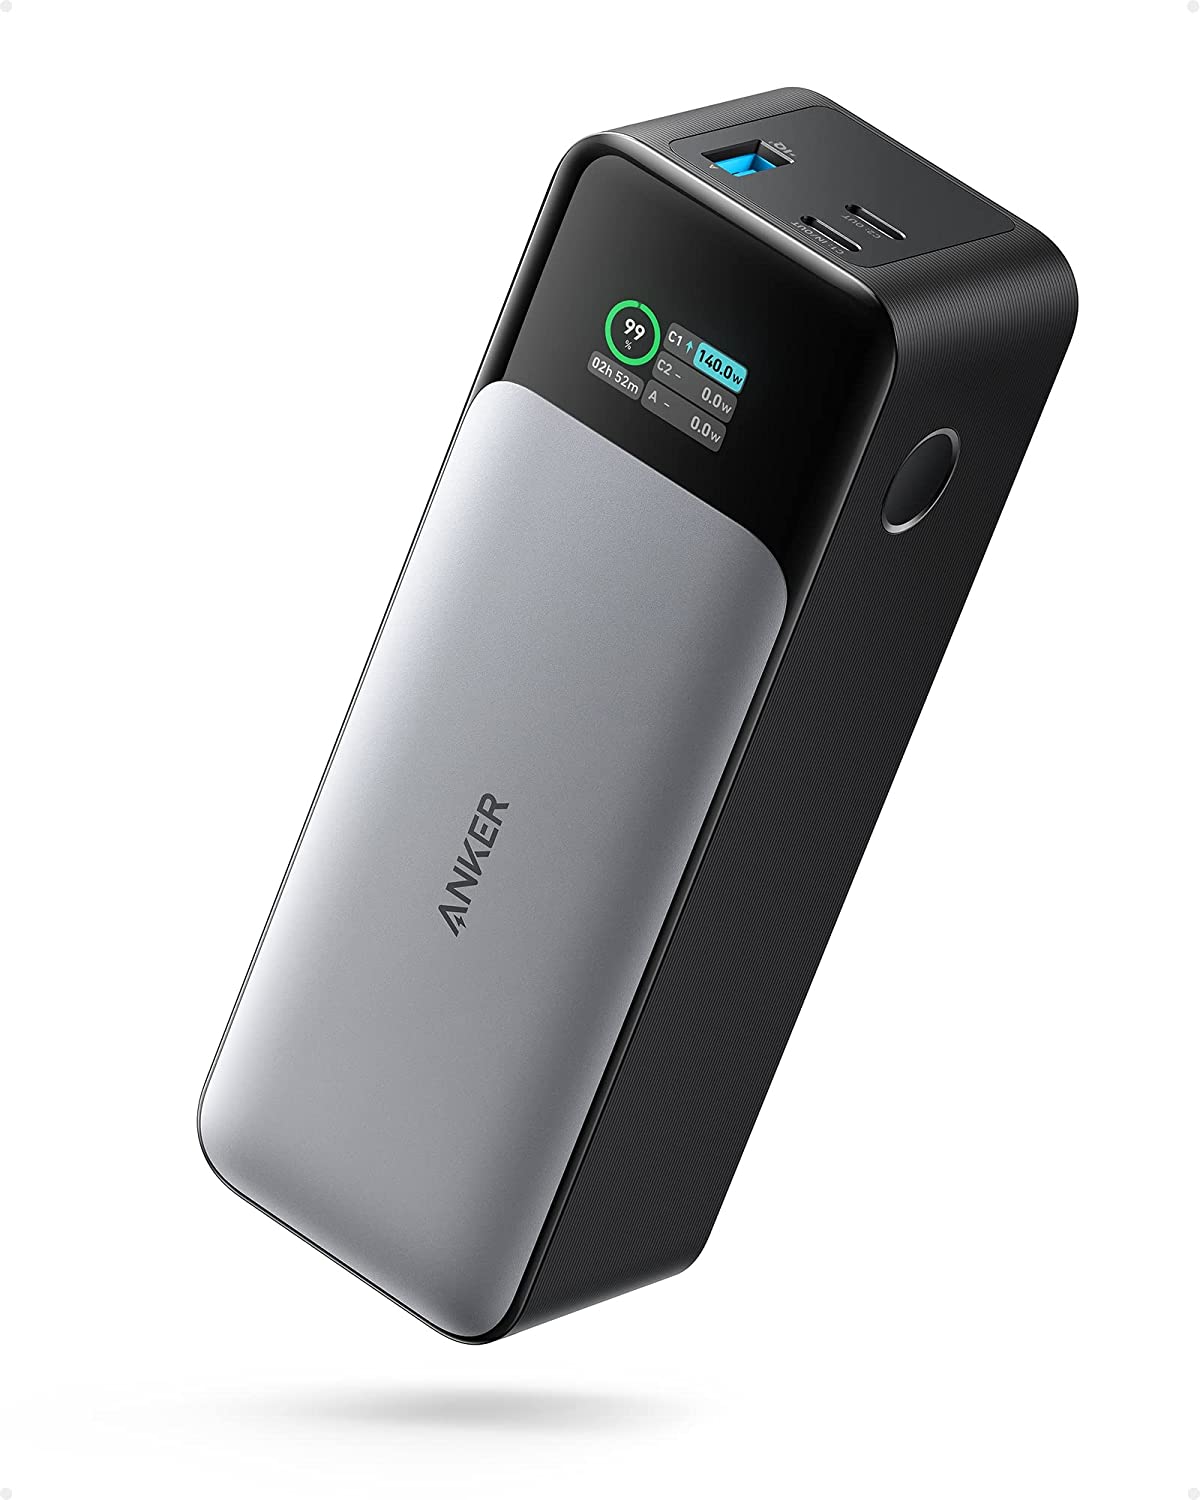 Prime Members: Anker 737 Power Bank 24,000mAh 3 Port Portable Charger $100 + Free Shipping